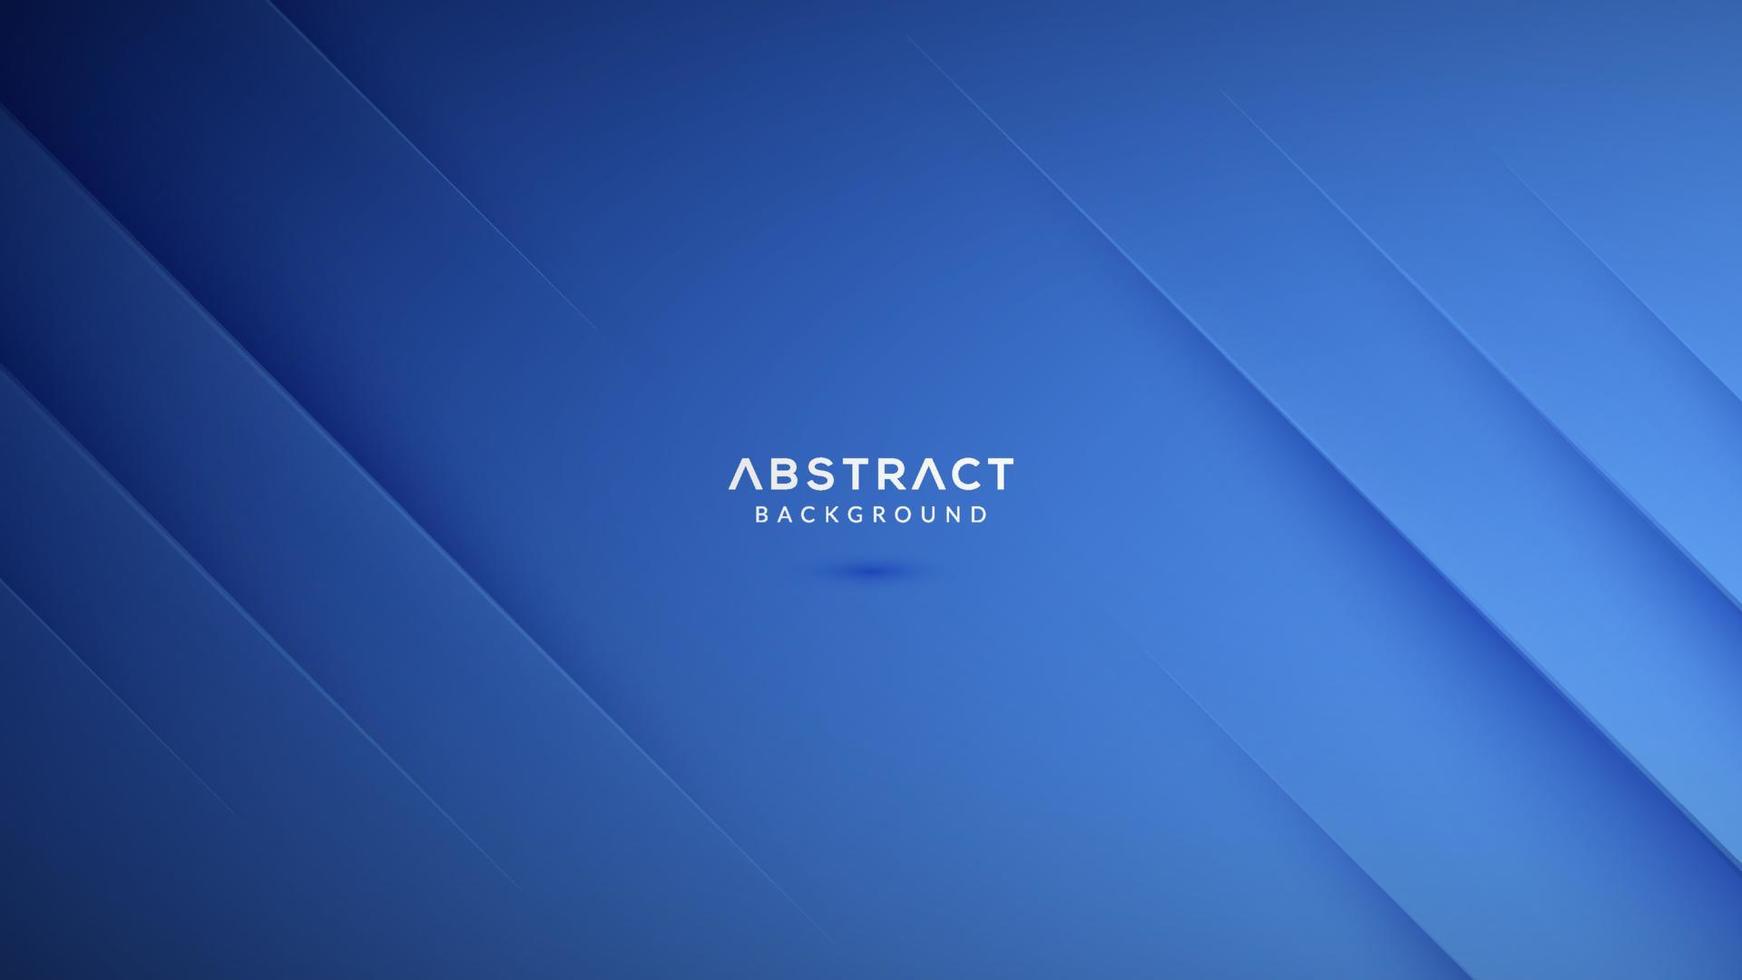 Abstract blue light background with scratches effect vector